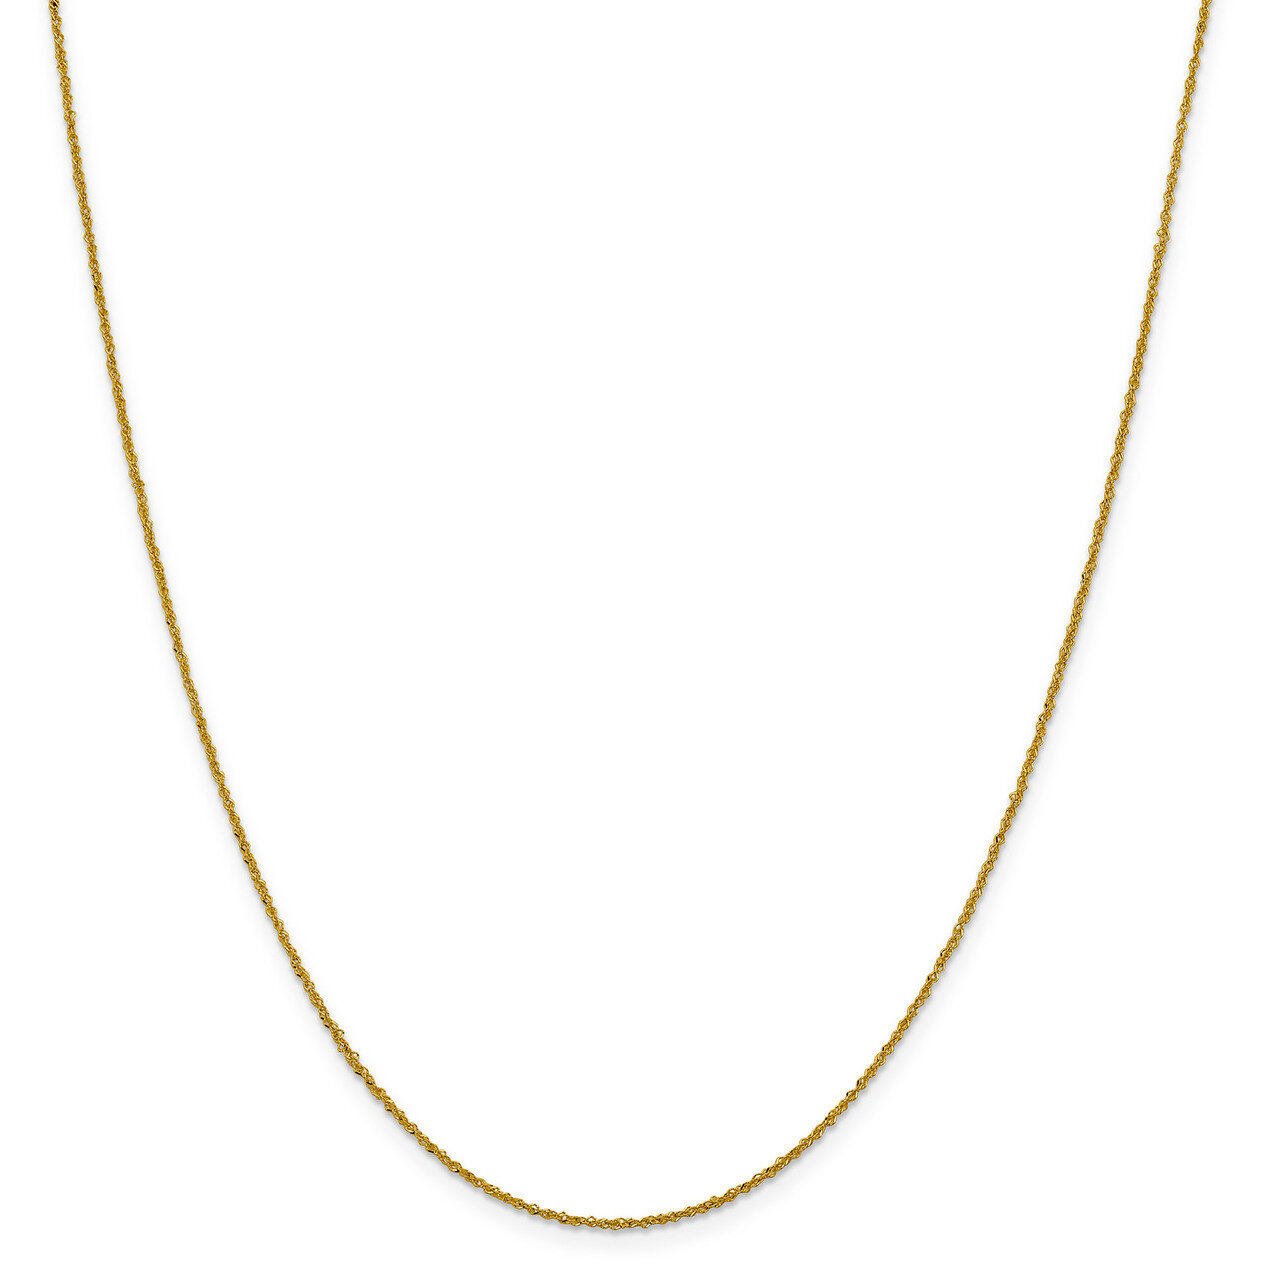 22 Inch 1 mm Sparkle Singapore Chain 14k Gold HB-1828-22